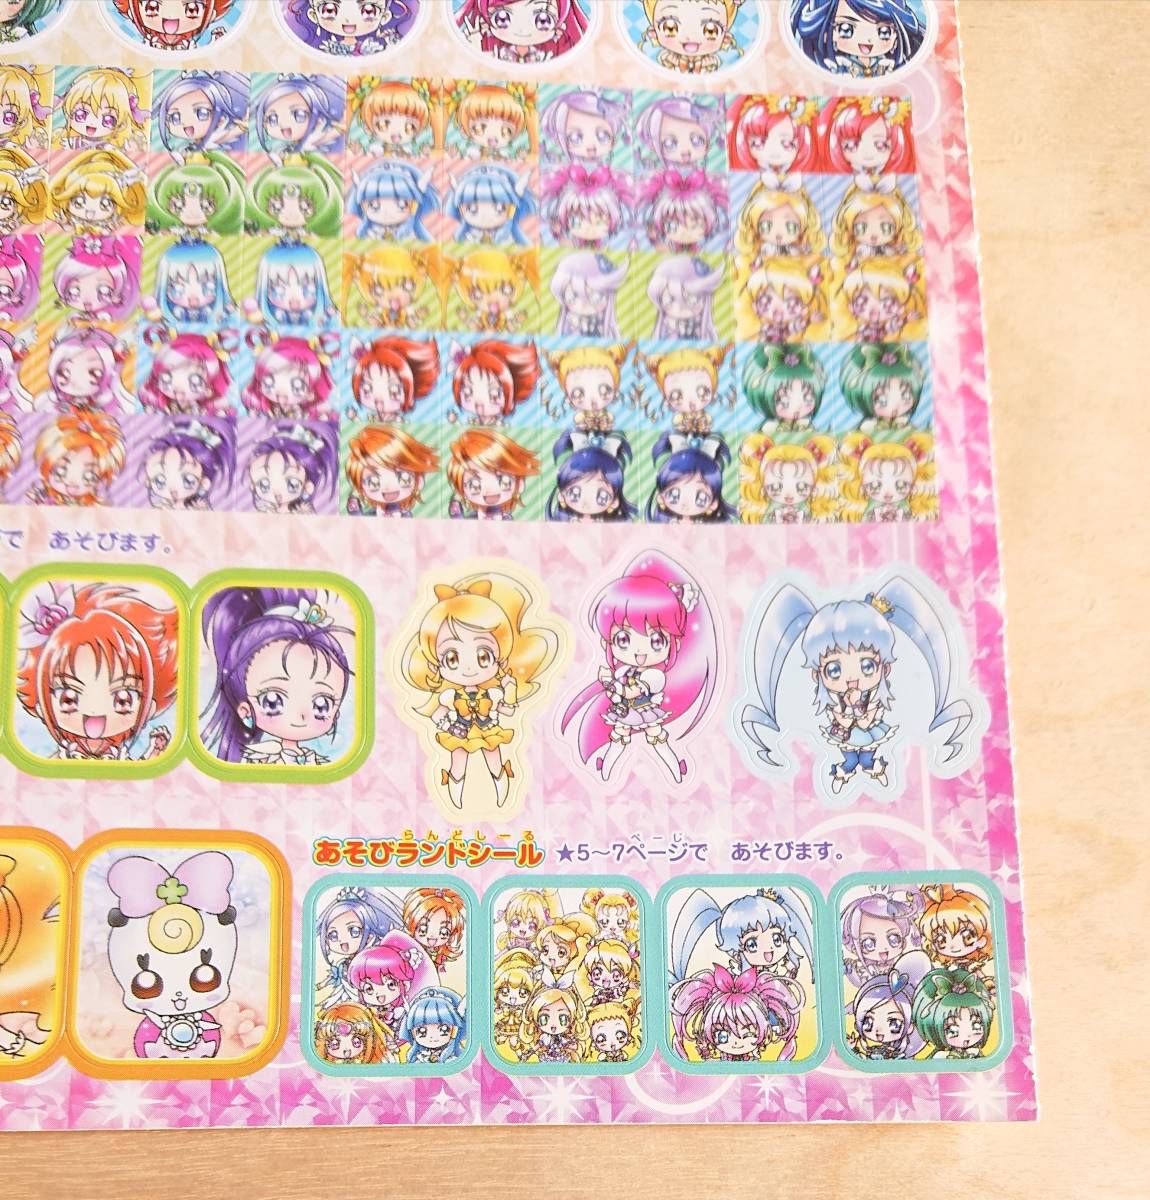  unused * is pines Charge Precure seal 128 sheets Precure All Stars appendix 